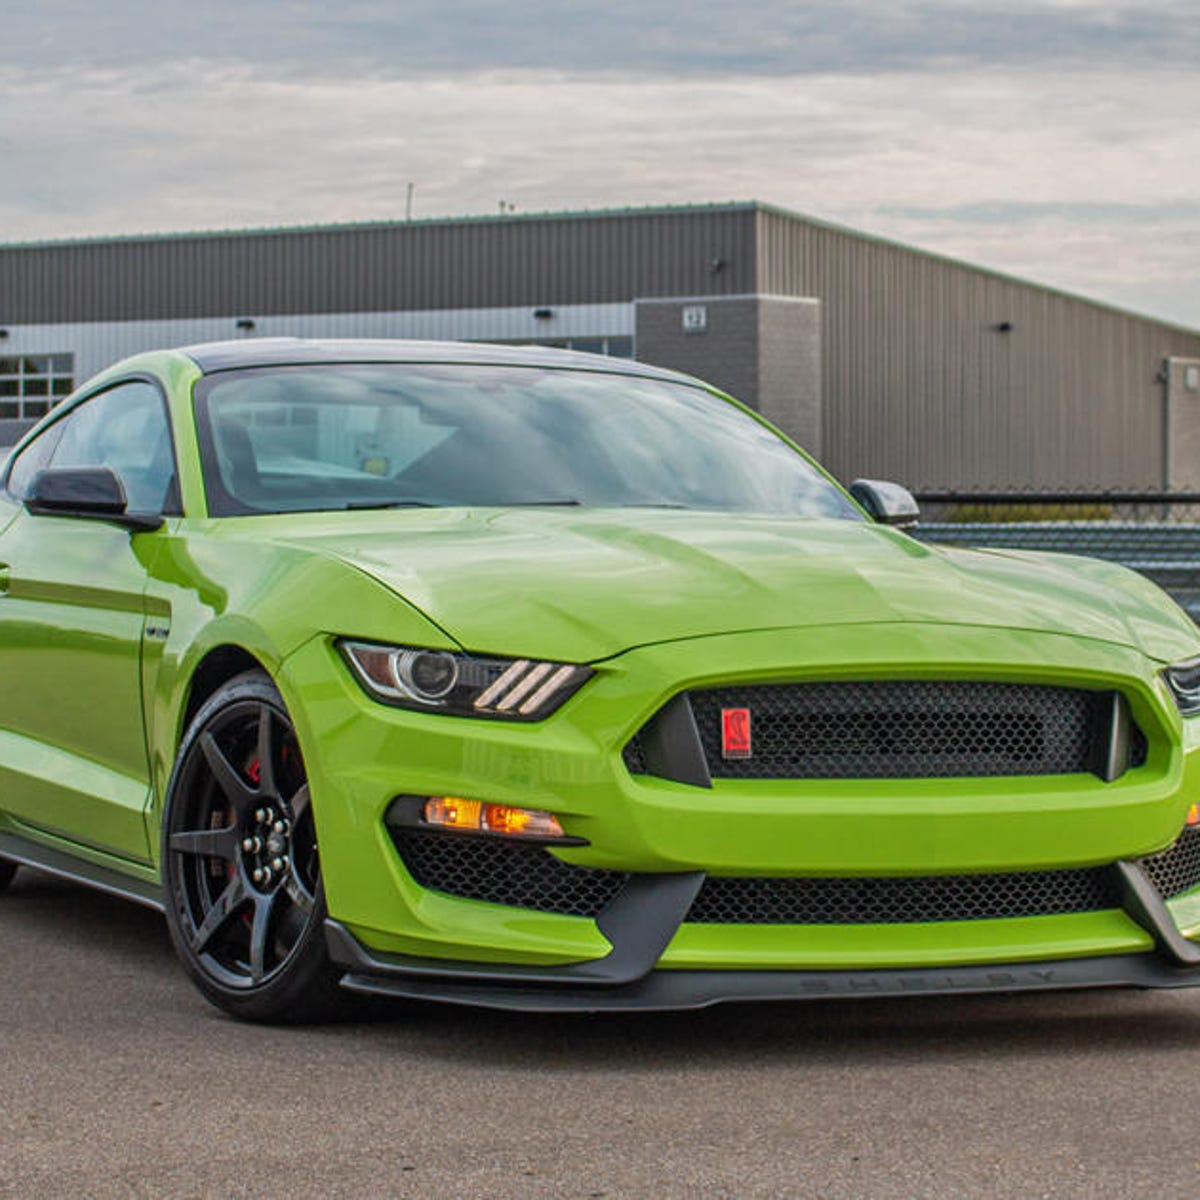 2020 Ford Mustang Shelby GT350R Fastback review: 2020 Ford Mustang Shelby  GT350R first drive review: Prescription strength grip and balance - CNET